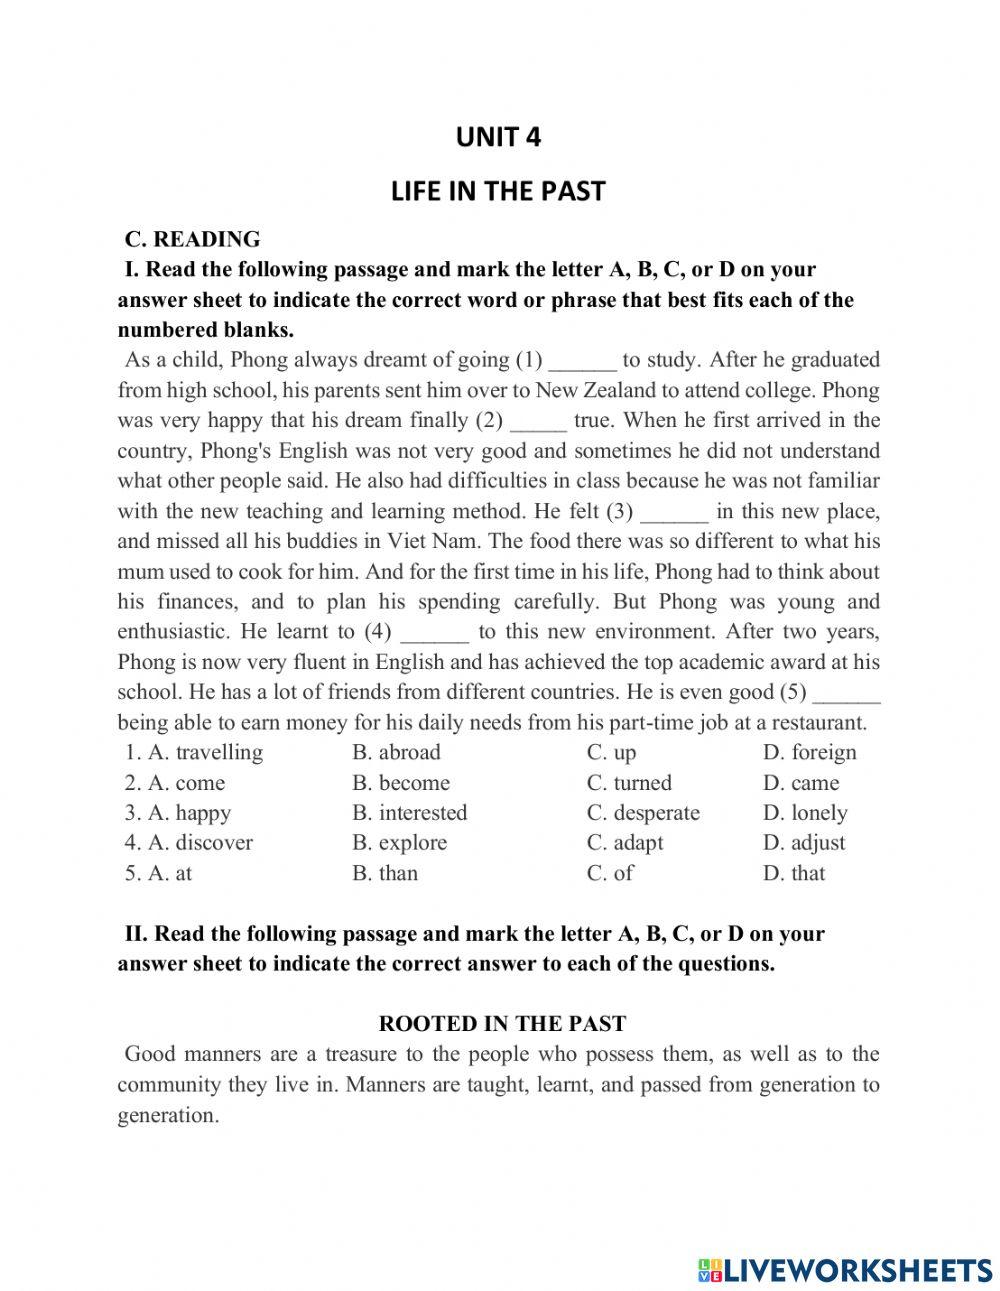 Reading-Unit 4-Life in the past